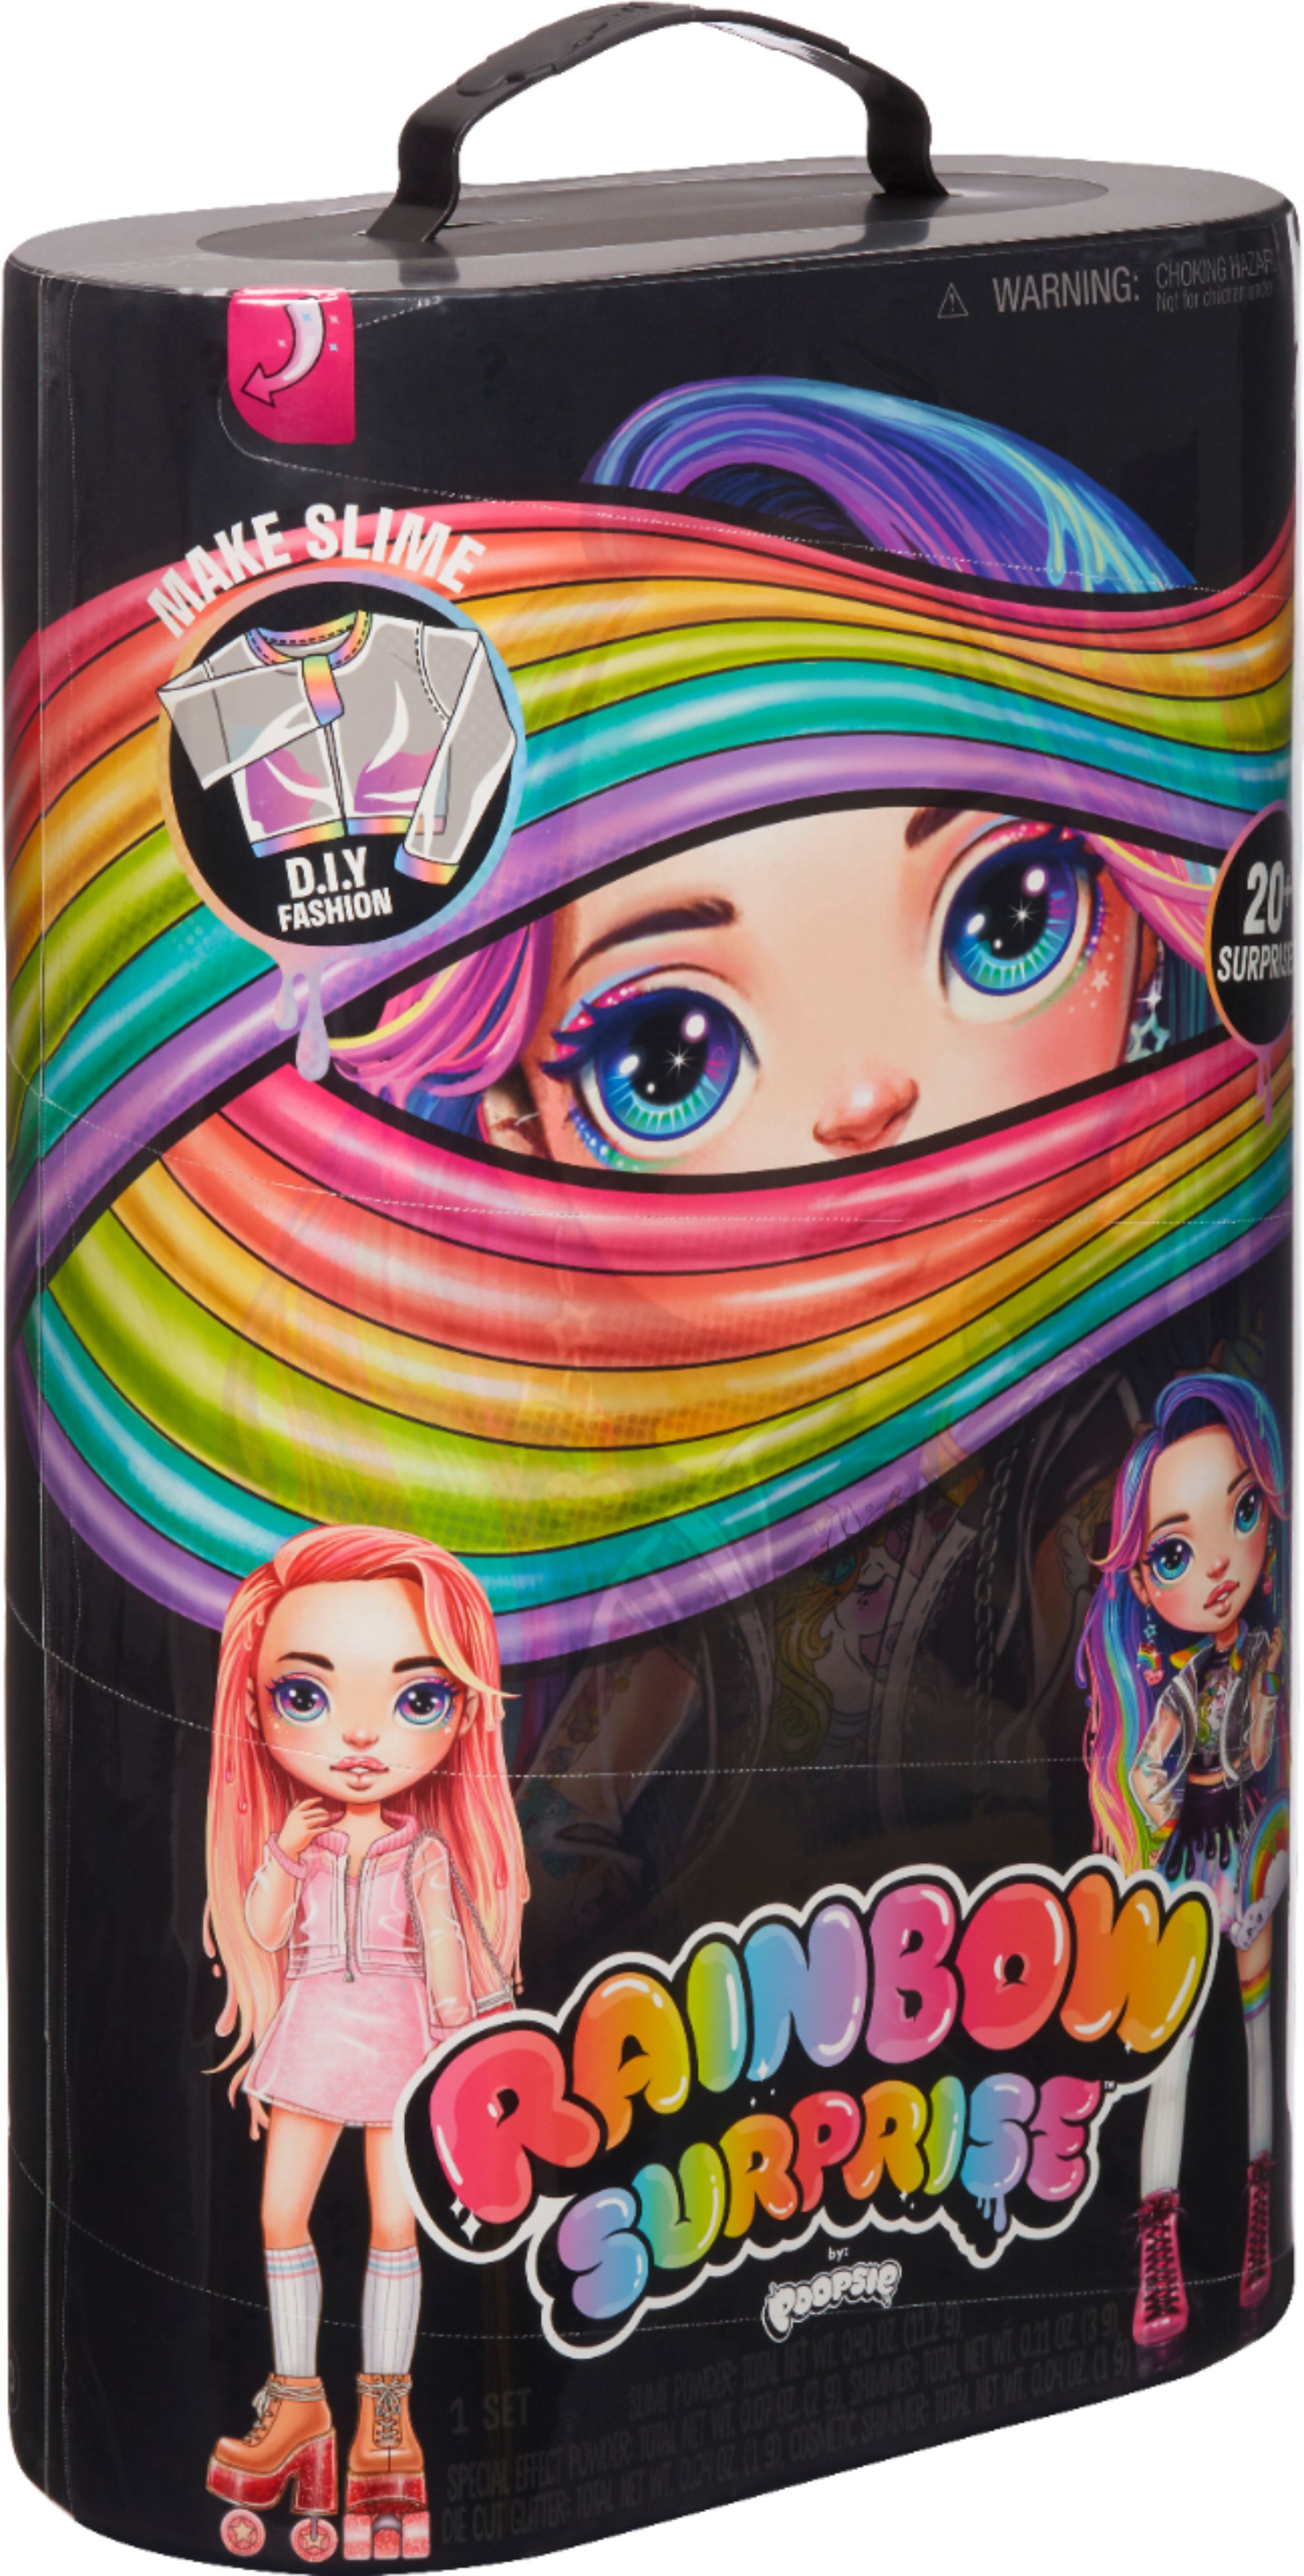 Angle View: Rainbow Surprise by Poopsie: 14" Doll with 20+ Slime & Fashion Surprises, Rainbow Dream or Pixie Rose